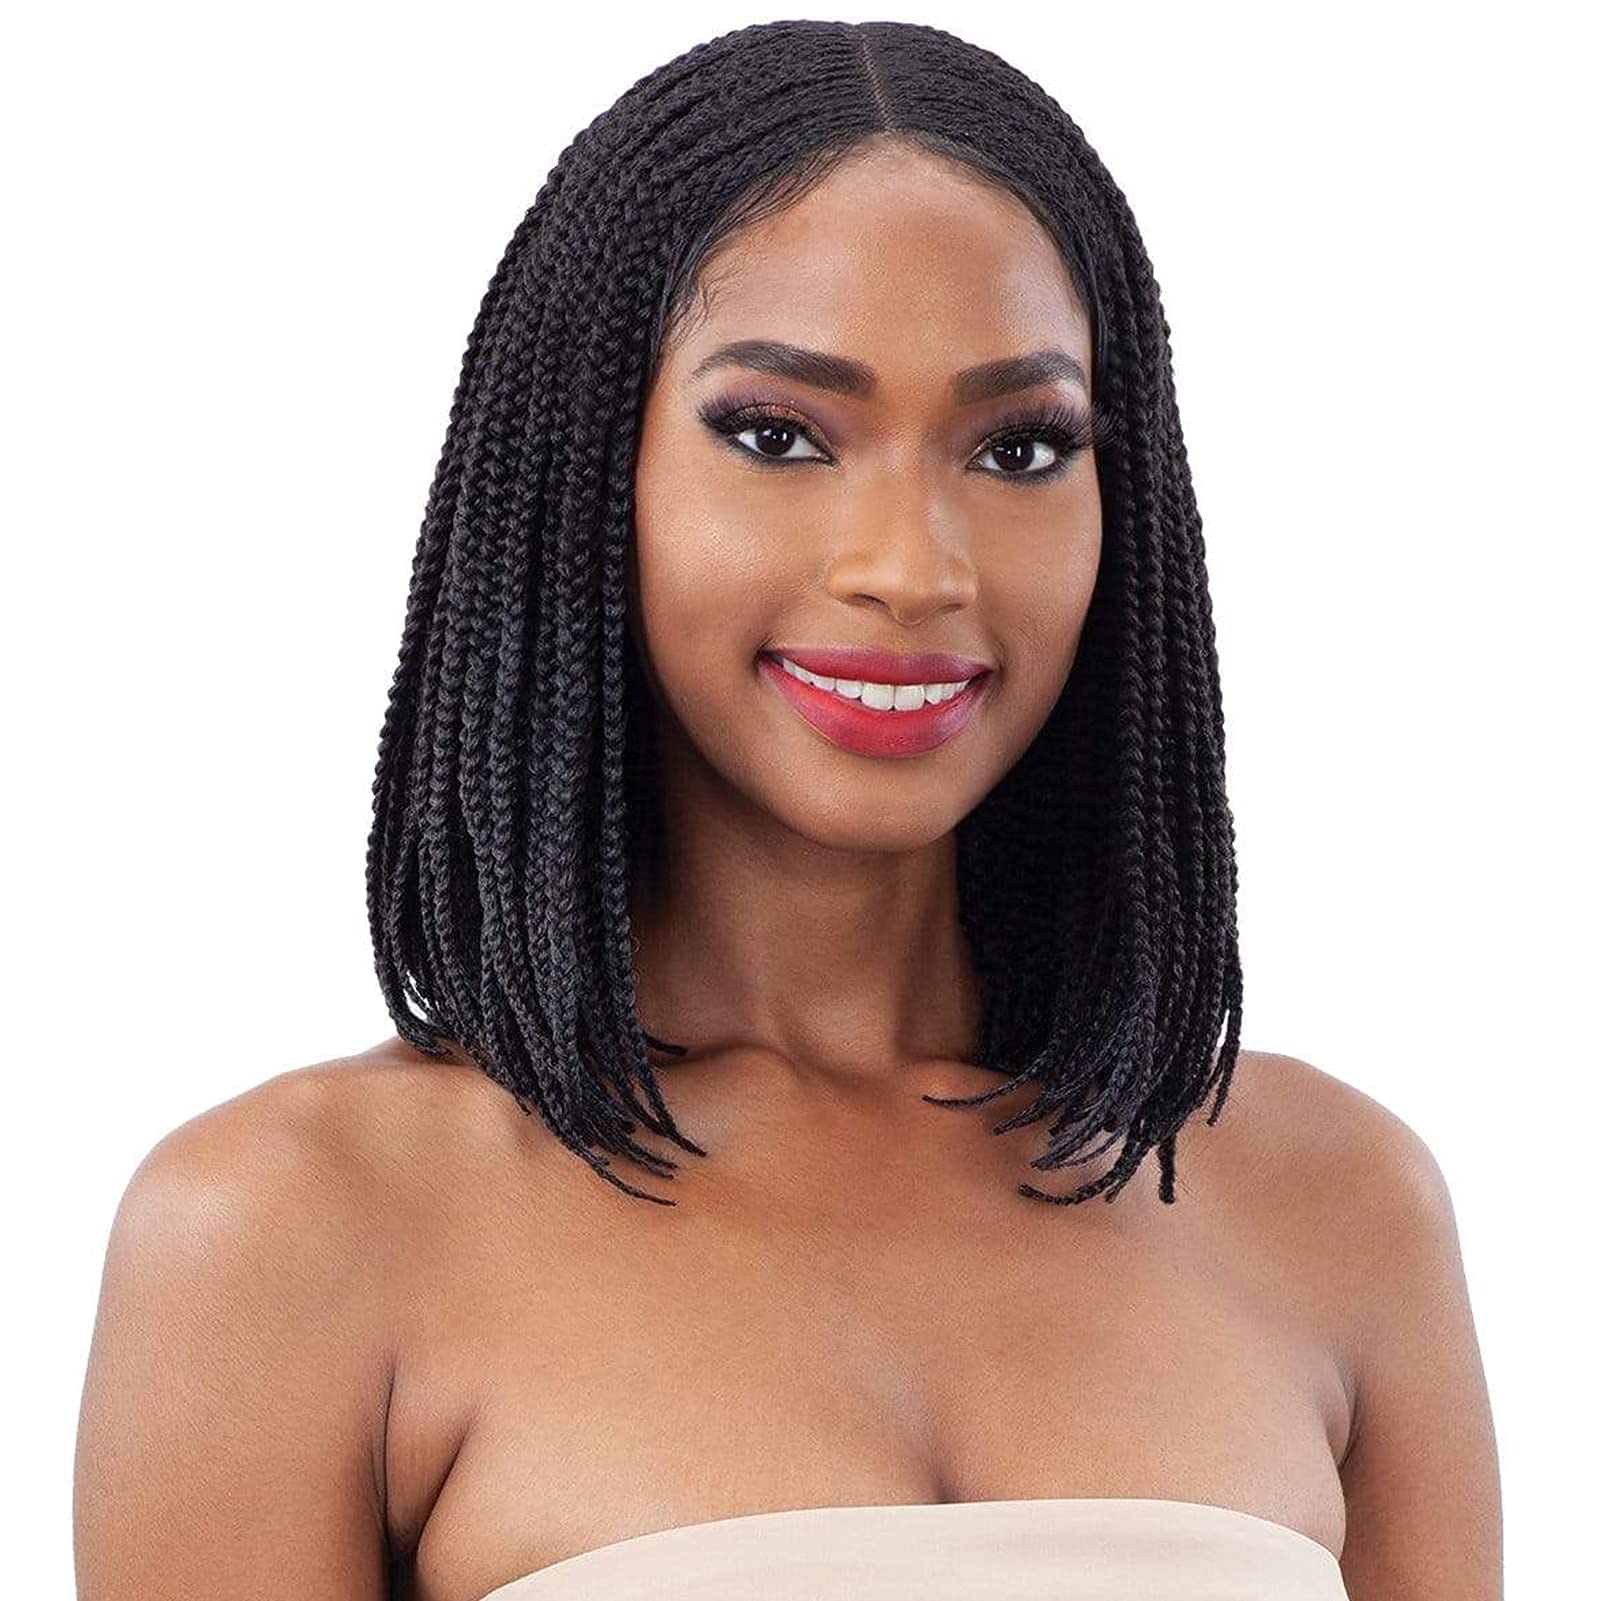 Facynos Knotless Braid Wigs for Black Women - Heat Resistant Fiber,Soft Synthetic Wig, Dense, Glueless, Lightweight, Not Exposed